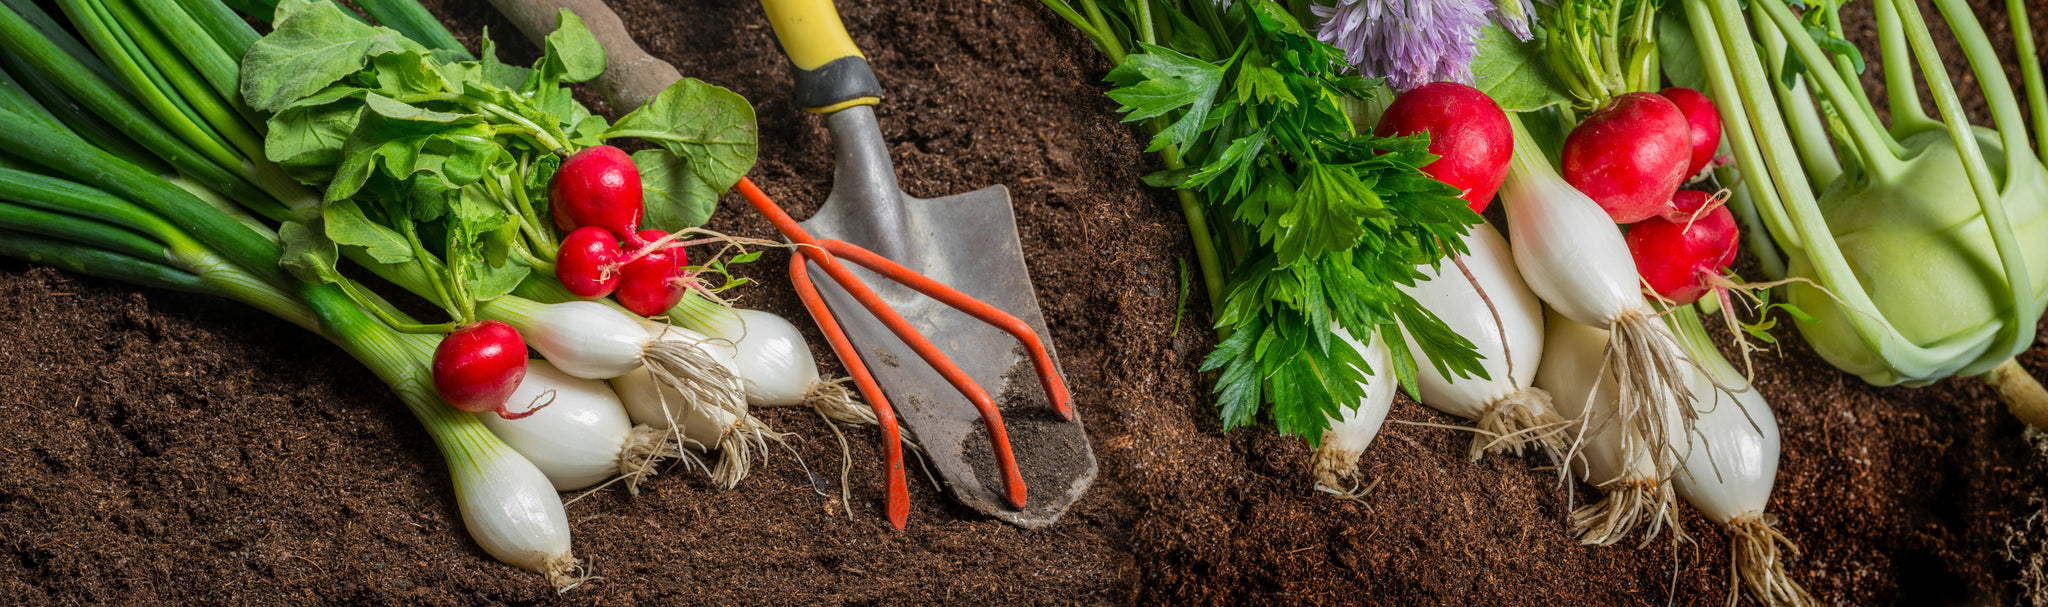 Vegetables and gardening tools